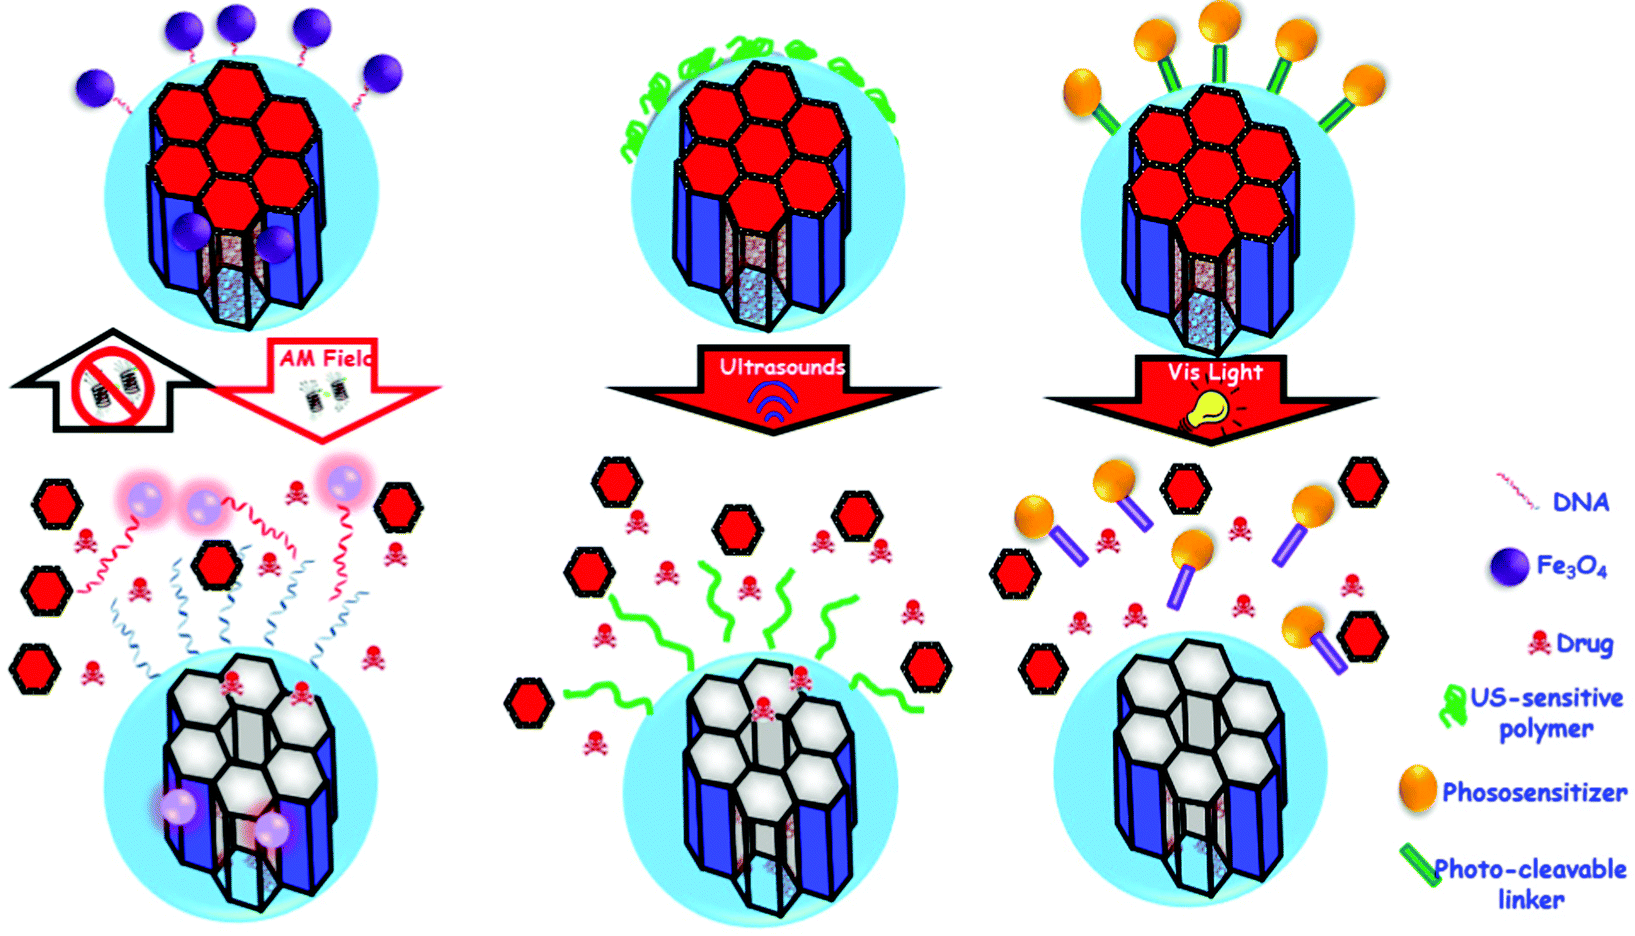 Engineering mesoporous silica nanoparticles for drug delivery 